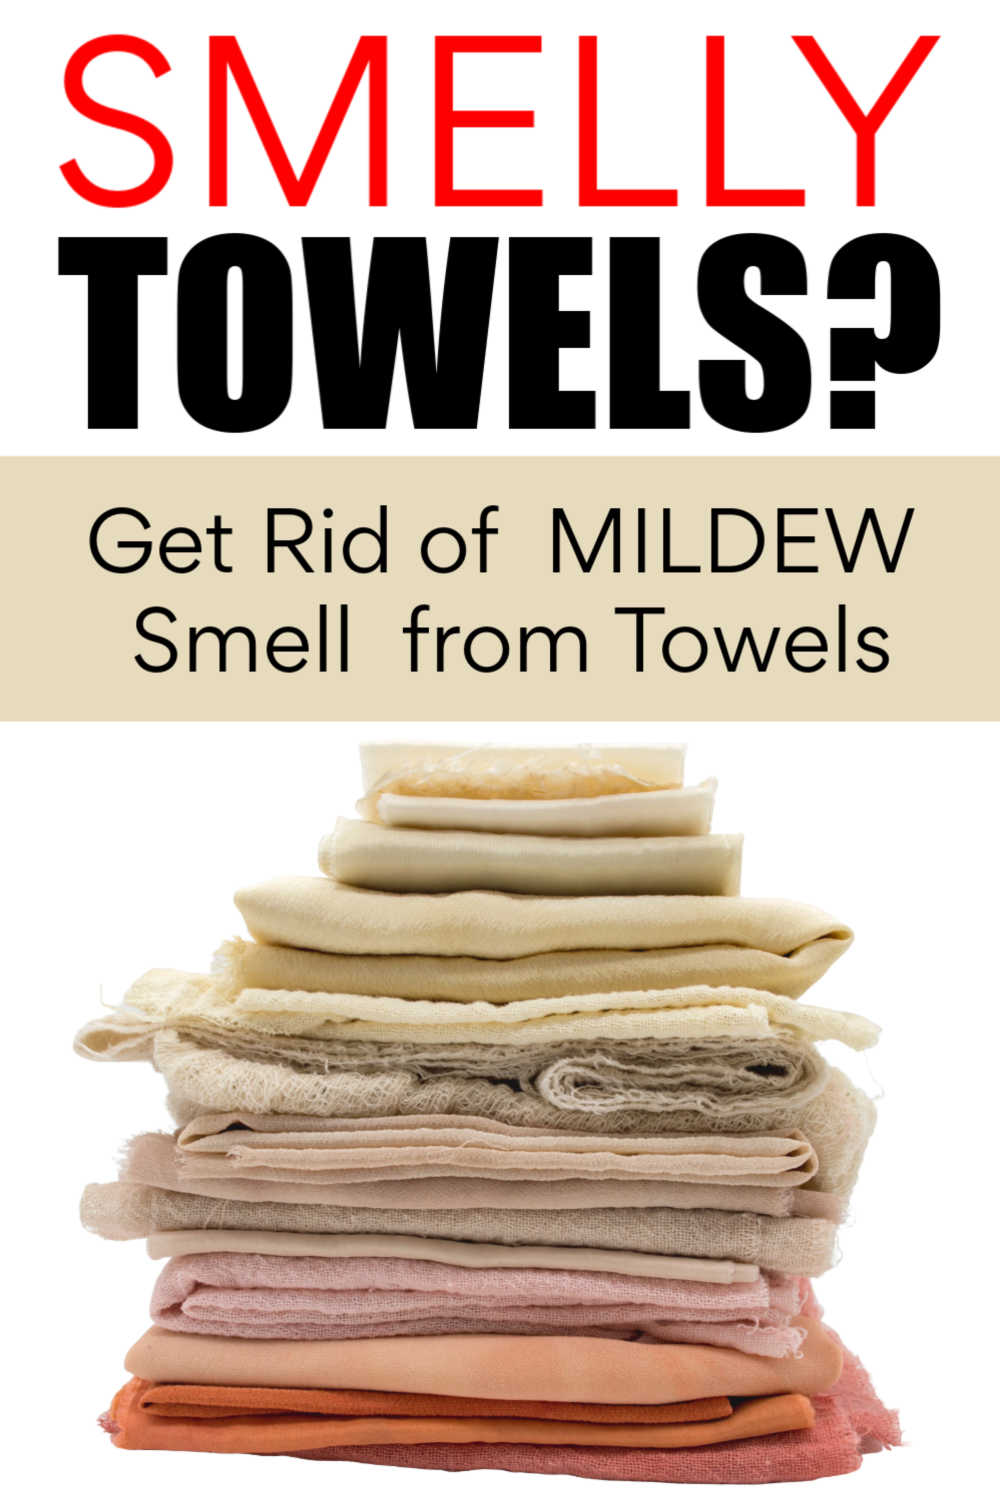 pile of fresh towels with text box on how to get rid of smelly towels